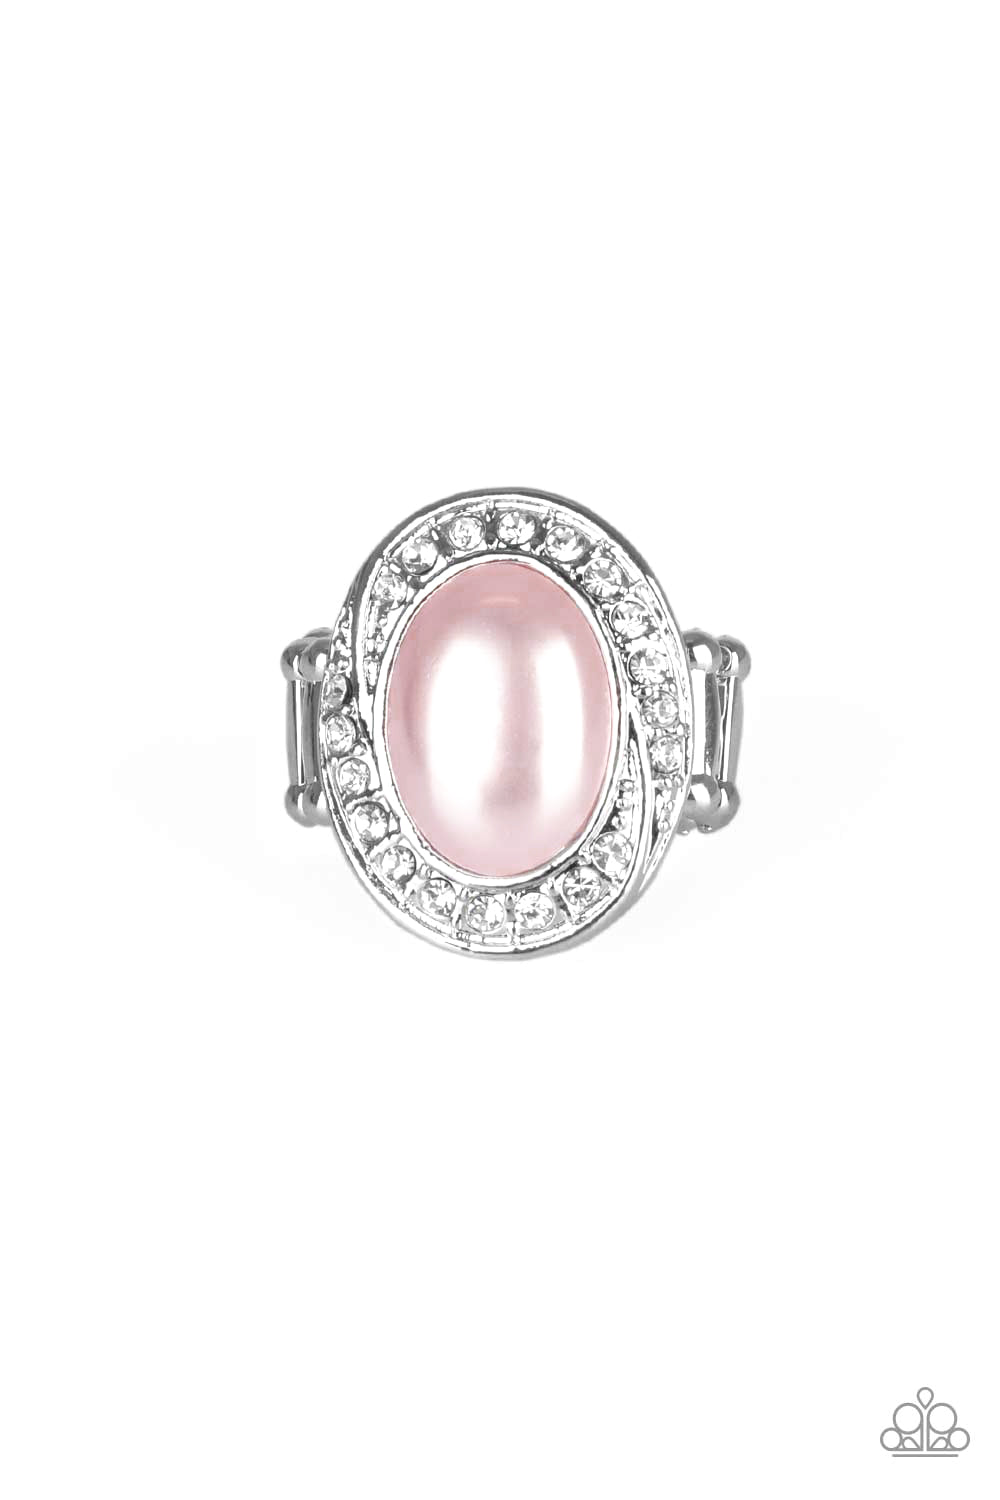 Paparazzi Accessories The ROYALE Treatment - Pink Rings – Lady T Accessories